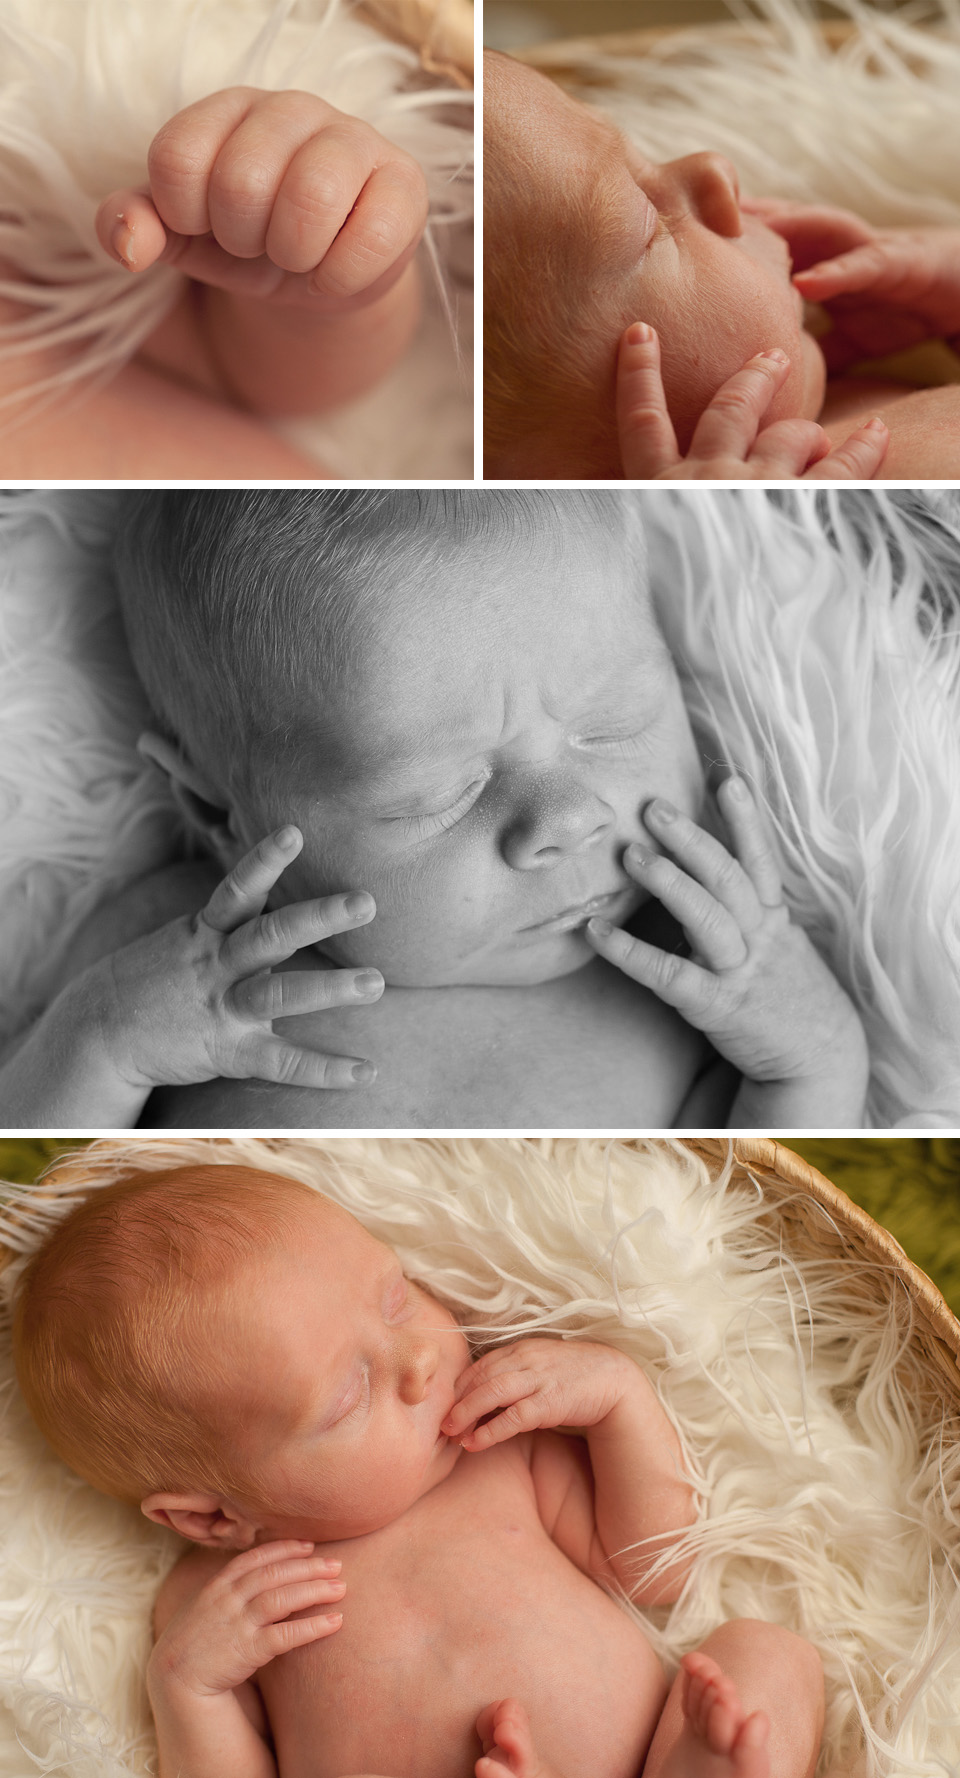 fingers, toes, lips, and eyelashes. All the sweet baby parts!